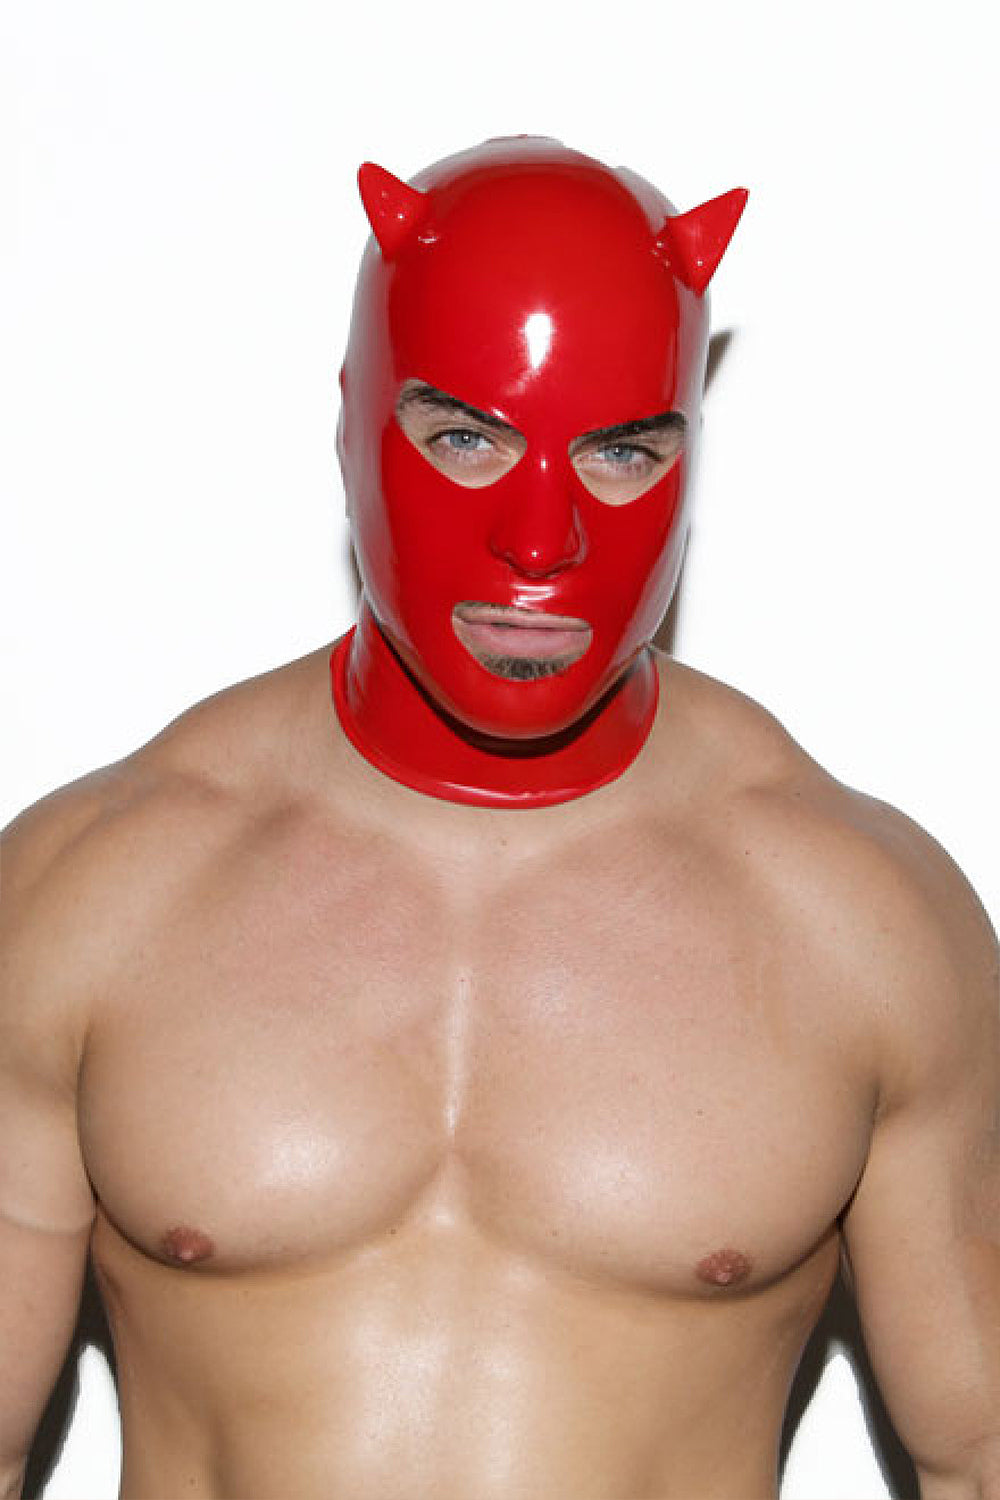 Limited Edition Red Devil Latex Mask - Slick It Up 